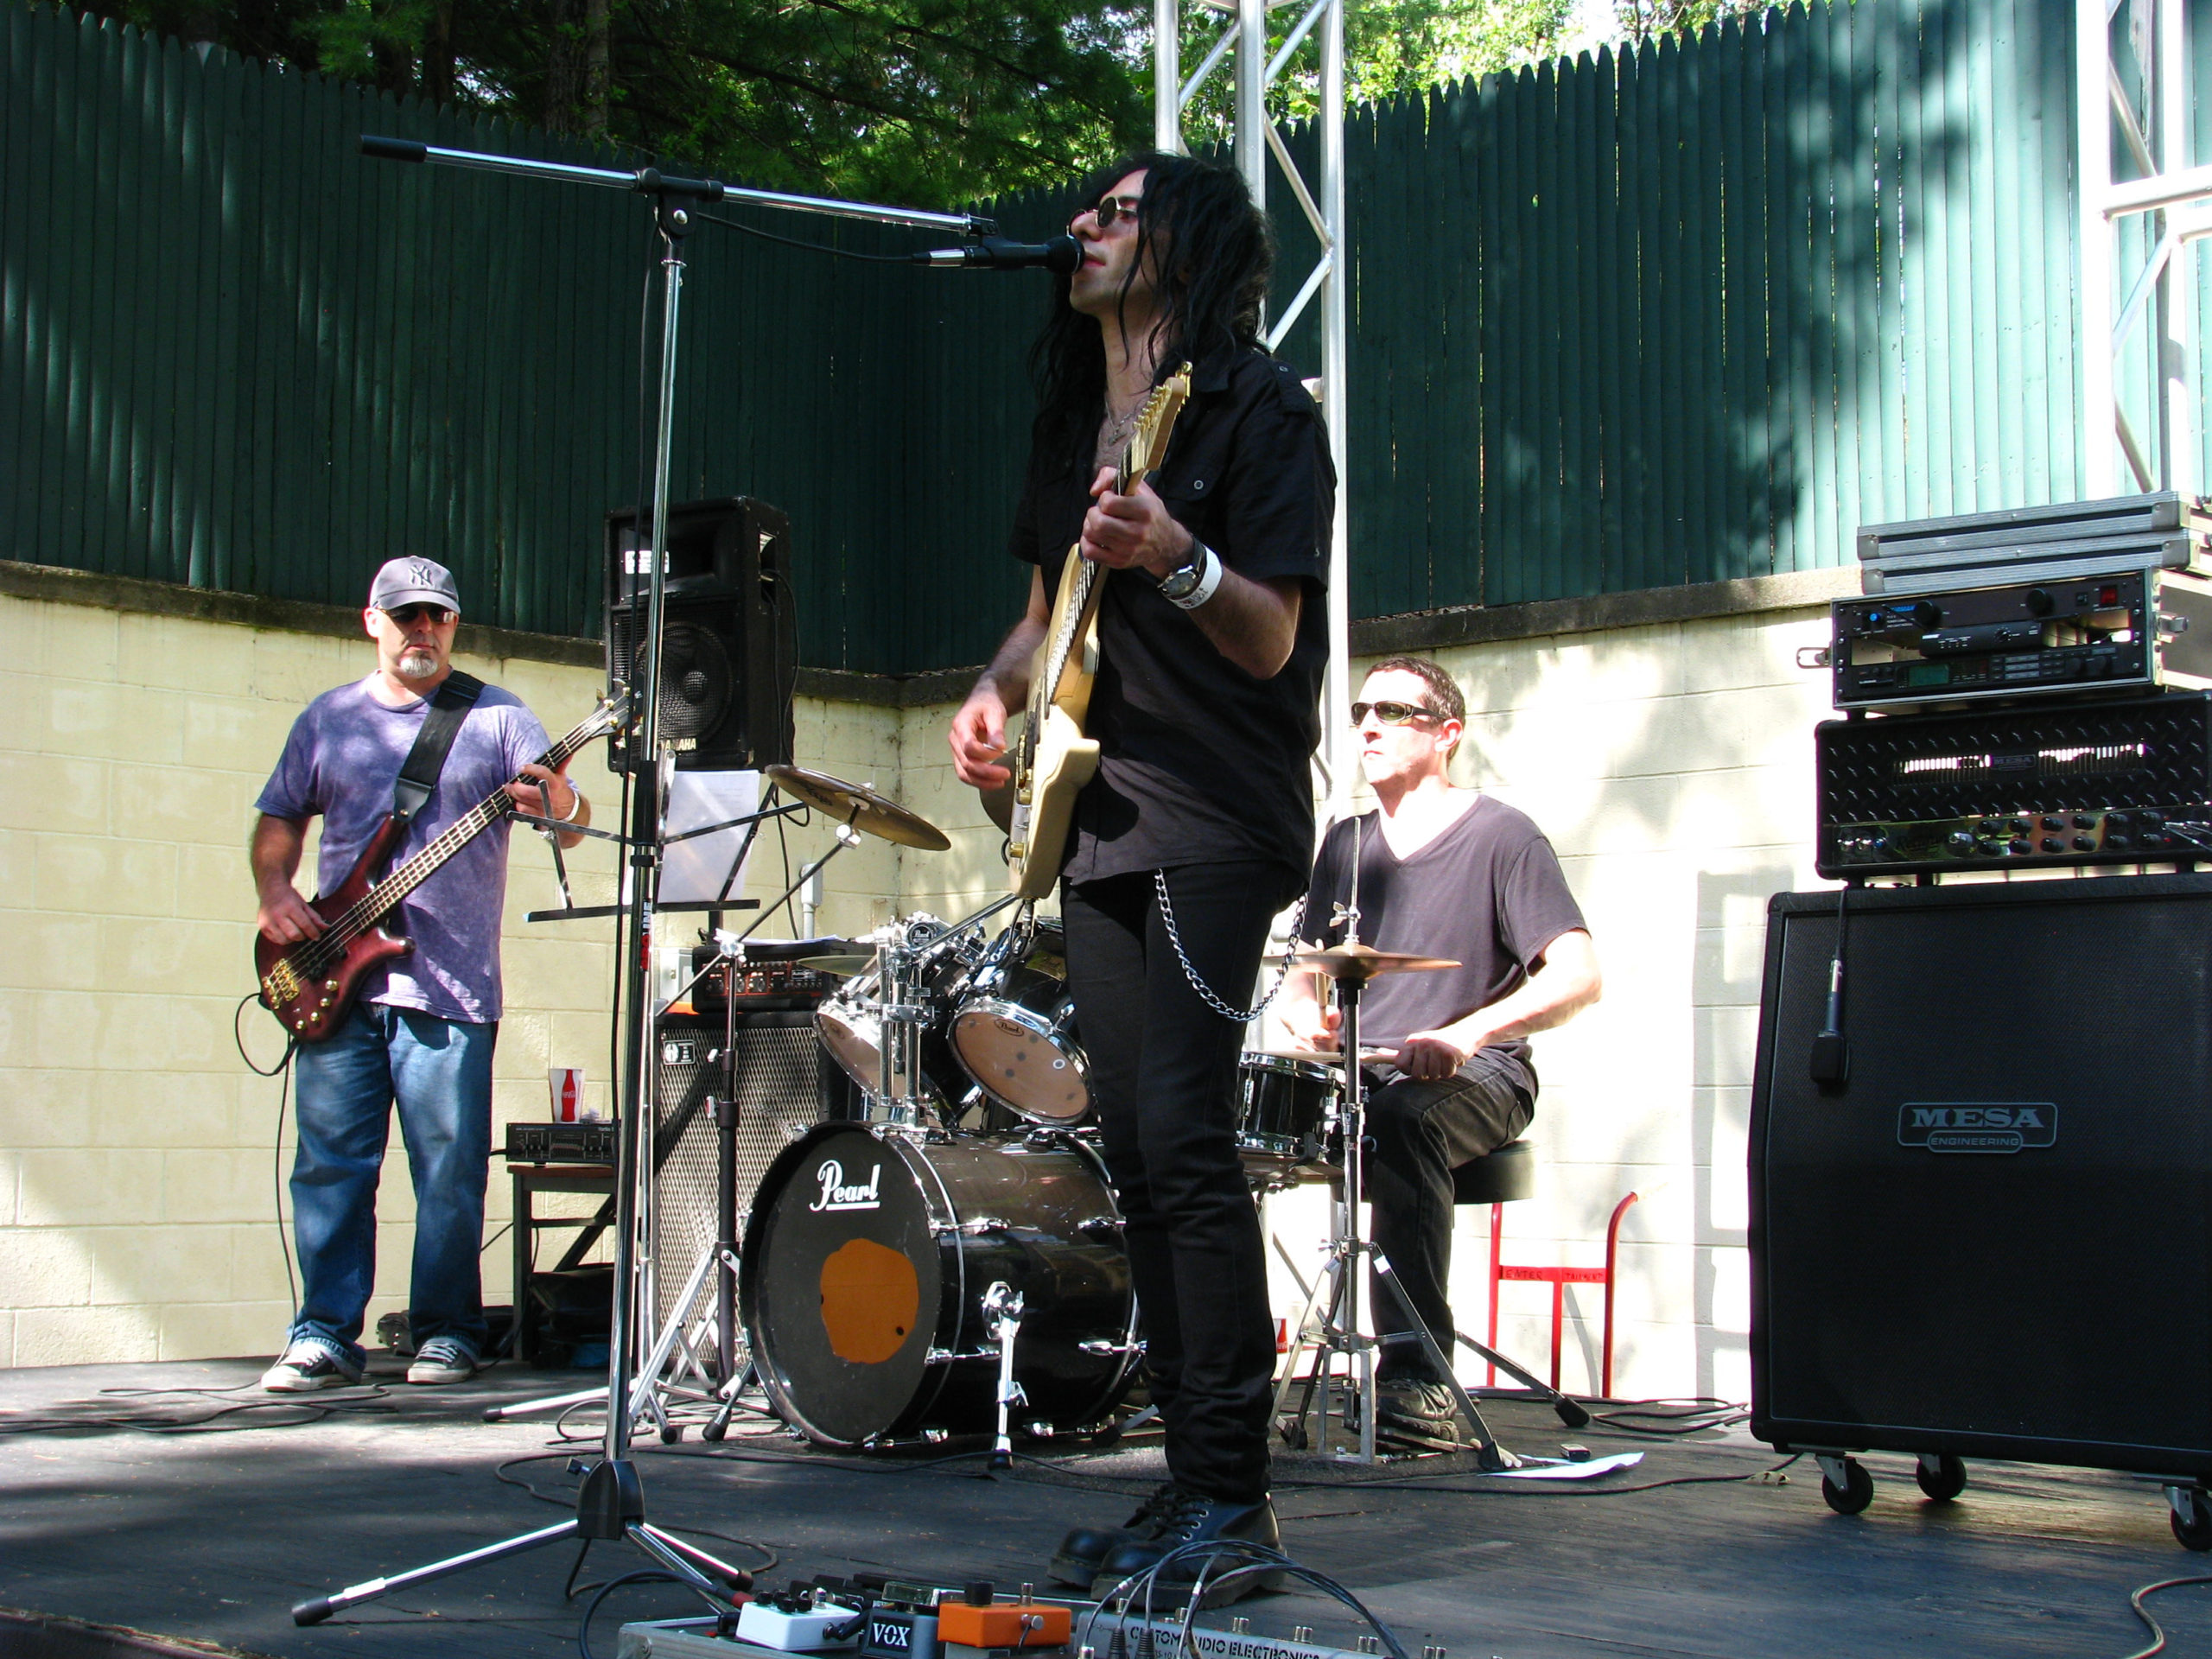 Mike Campese Band - Six Flags, Great Escape Show.